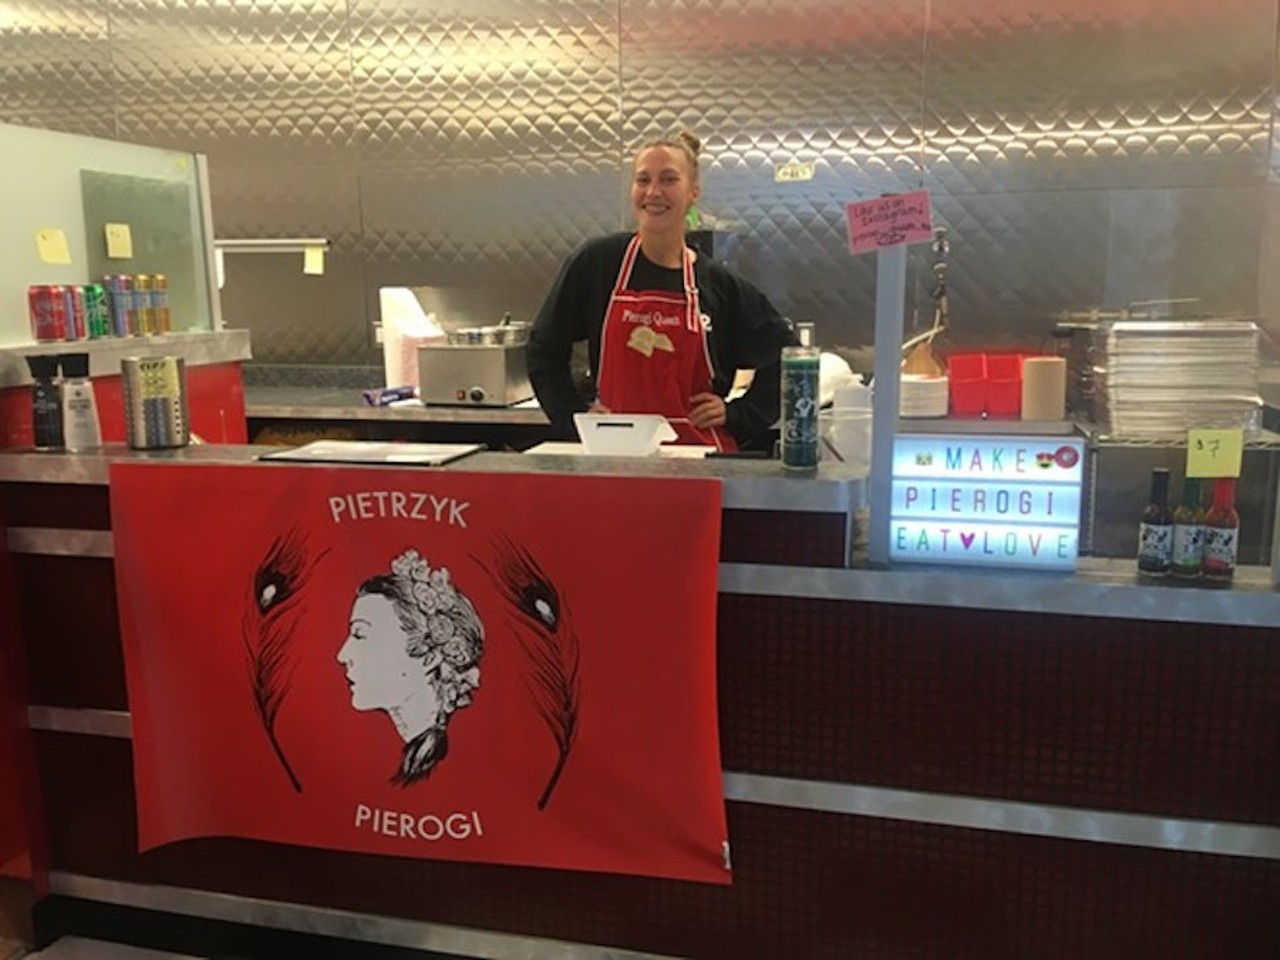 Pietrzyk Pierogi
1429 Gratiot Ave., suite 109; 313-614-9393; pietrzykpierogi.com
Erica Pietzyk has operated the pierogi shop, based on her family’s recipes, since 2014. She opened a storefront in Detroit’s Eastern Market Gratiot Market in 2019.